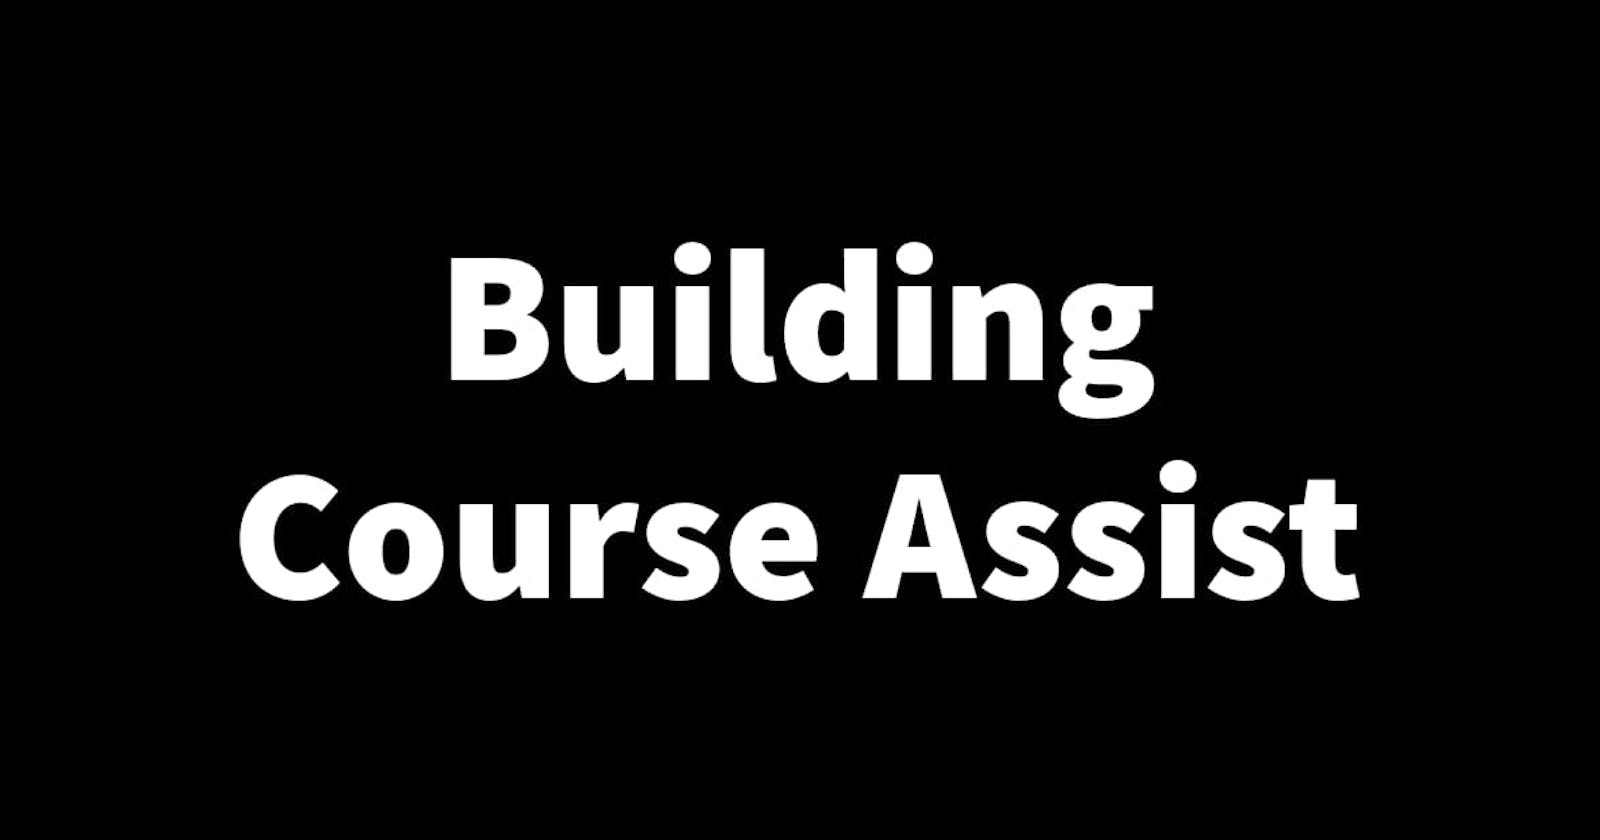 Building Course Assist Part 16: Testing the Course Assist apps on iOS